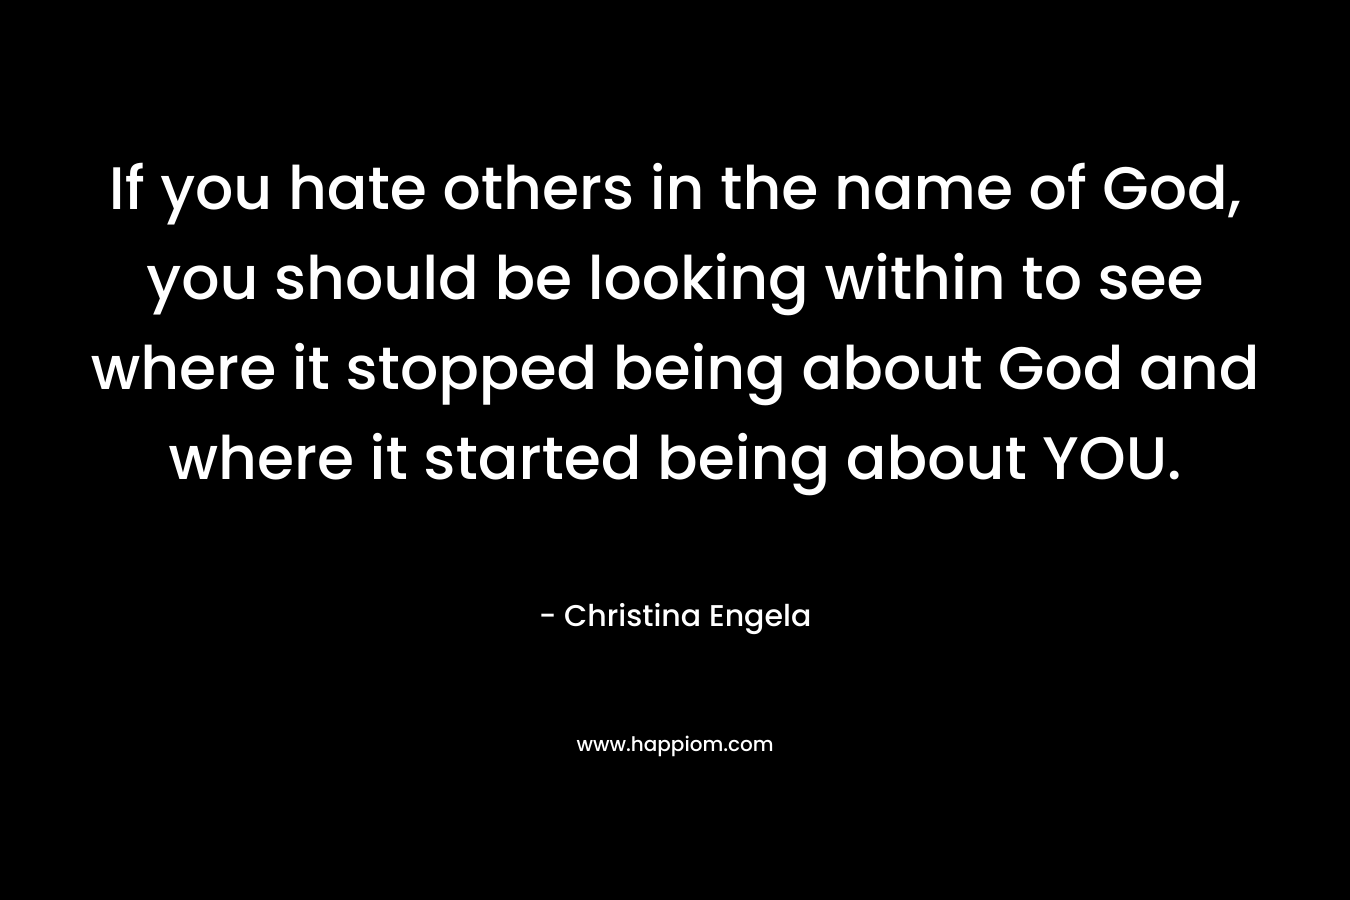 If you hate others in the name of God, you should be looking within to see where it stopped being about God and where it started being about YOU.